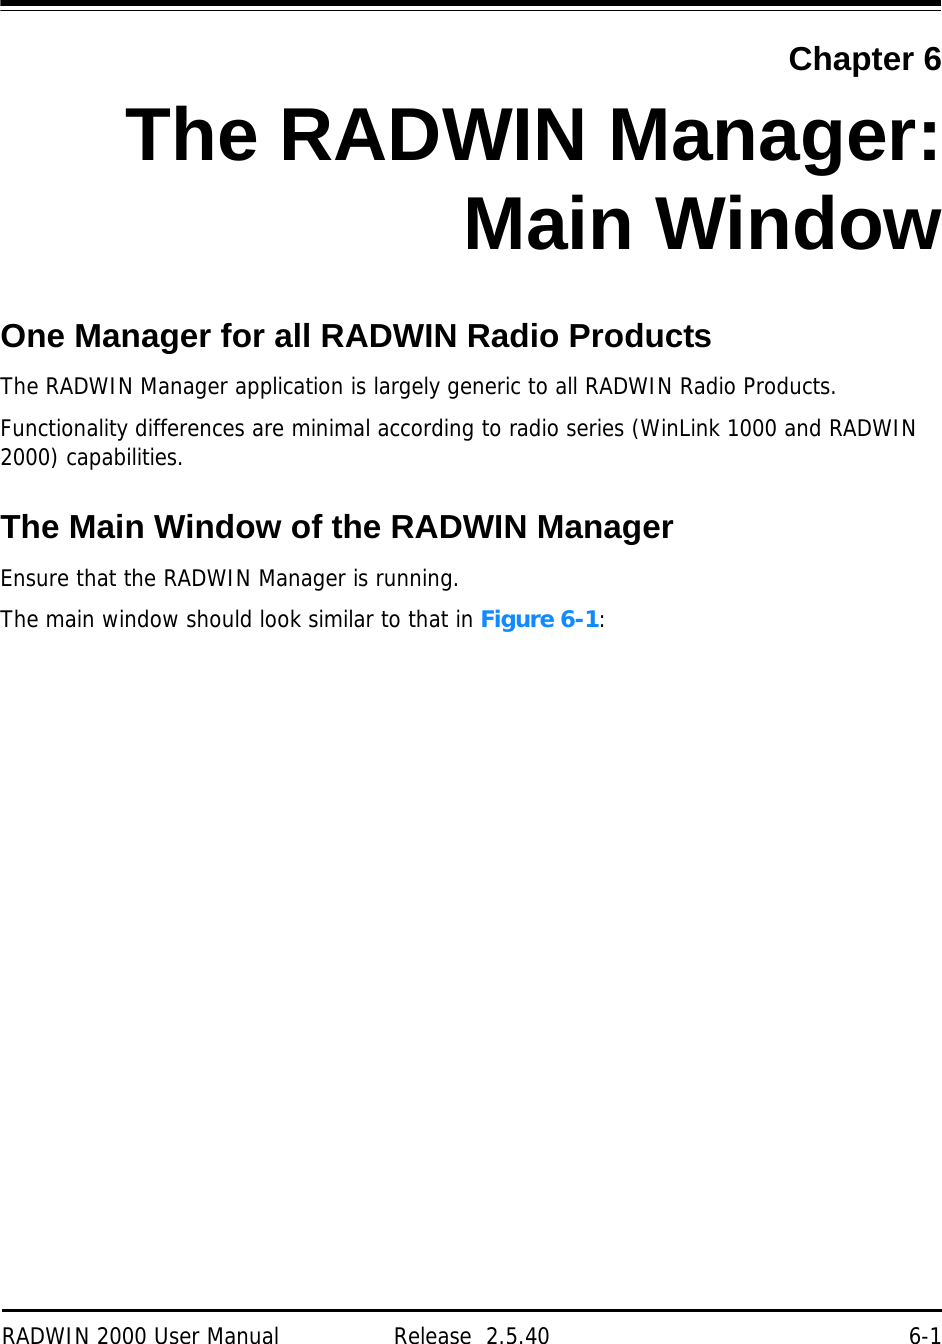 RADWIN 2000 User Manual Release  2.5.40 6-1 Chapter 6The RADWIN Manager:Main WindowOne Manager for all RADWIN Radio ProductsThe RADWIN Manager application is largely generic to all RADWIN Radio Products. Functionality differences are minimal according to radio series (WinLink 1000 and RADWIN 2000) capabilities.The Main Window of the RADWIN ManagerEnsure that the RADWIN Manager is running.The main window should look similar to that in Figure 6-1: